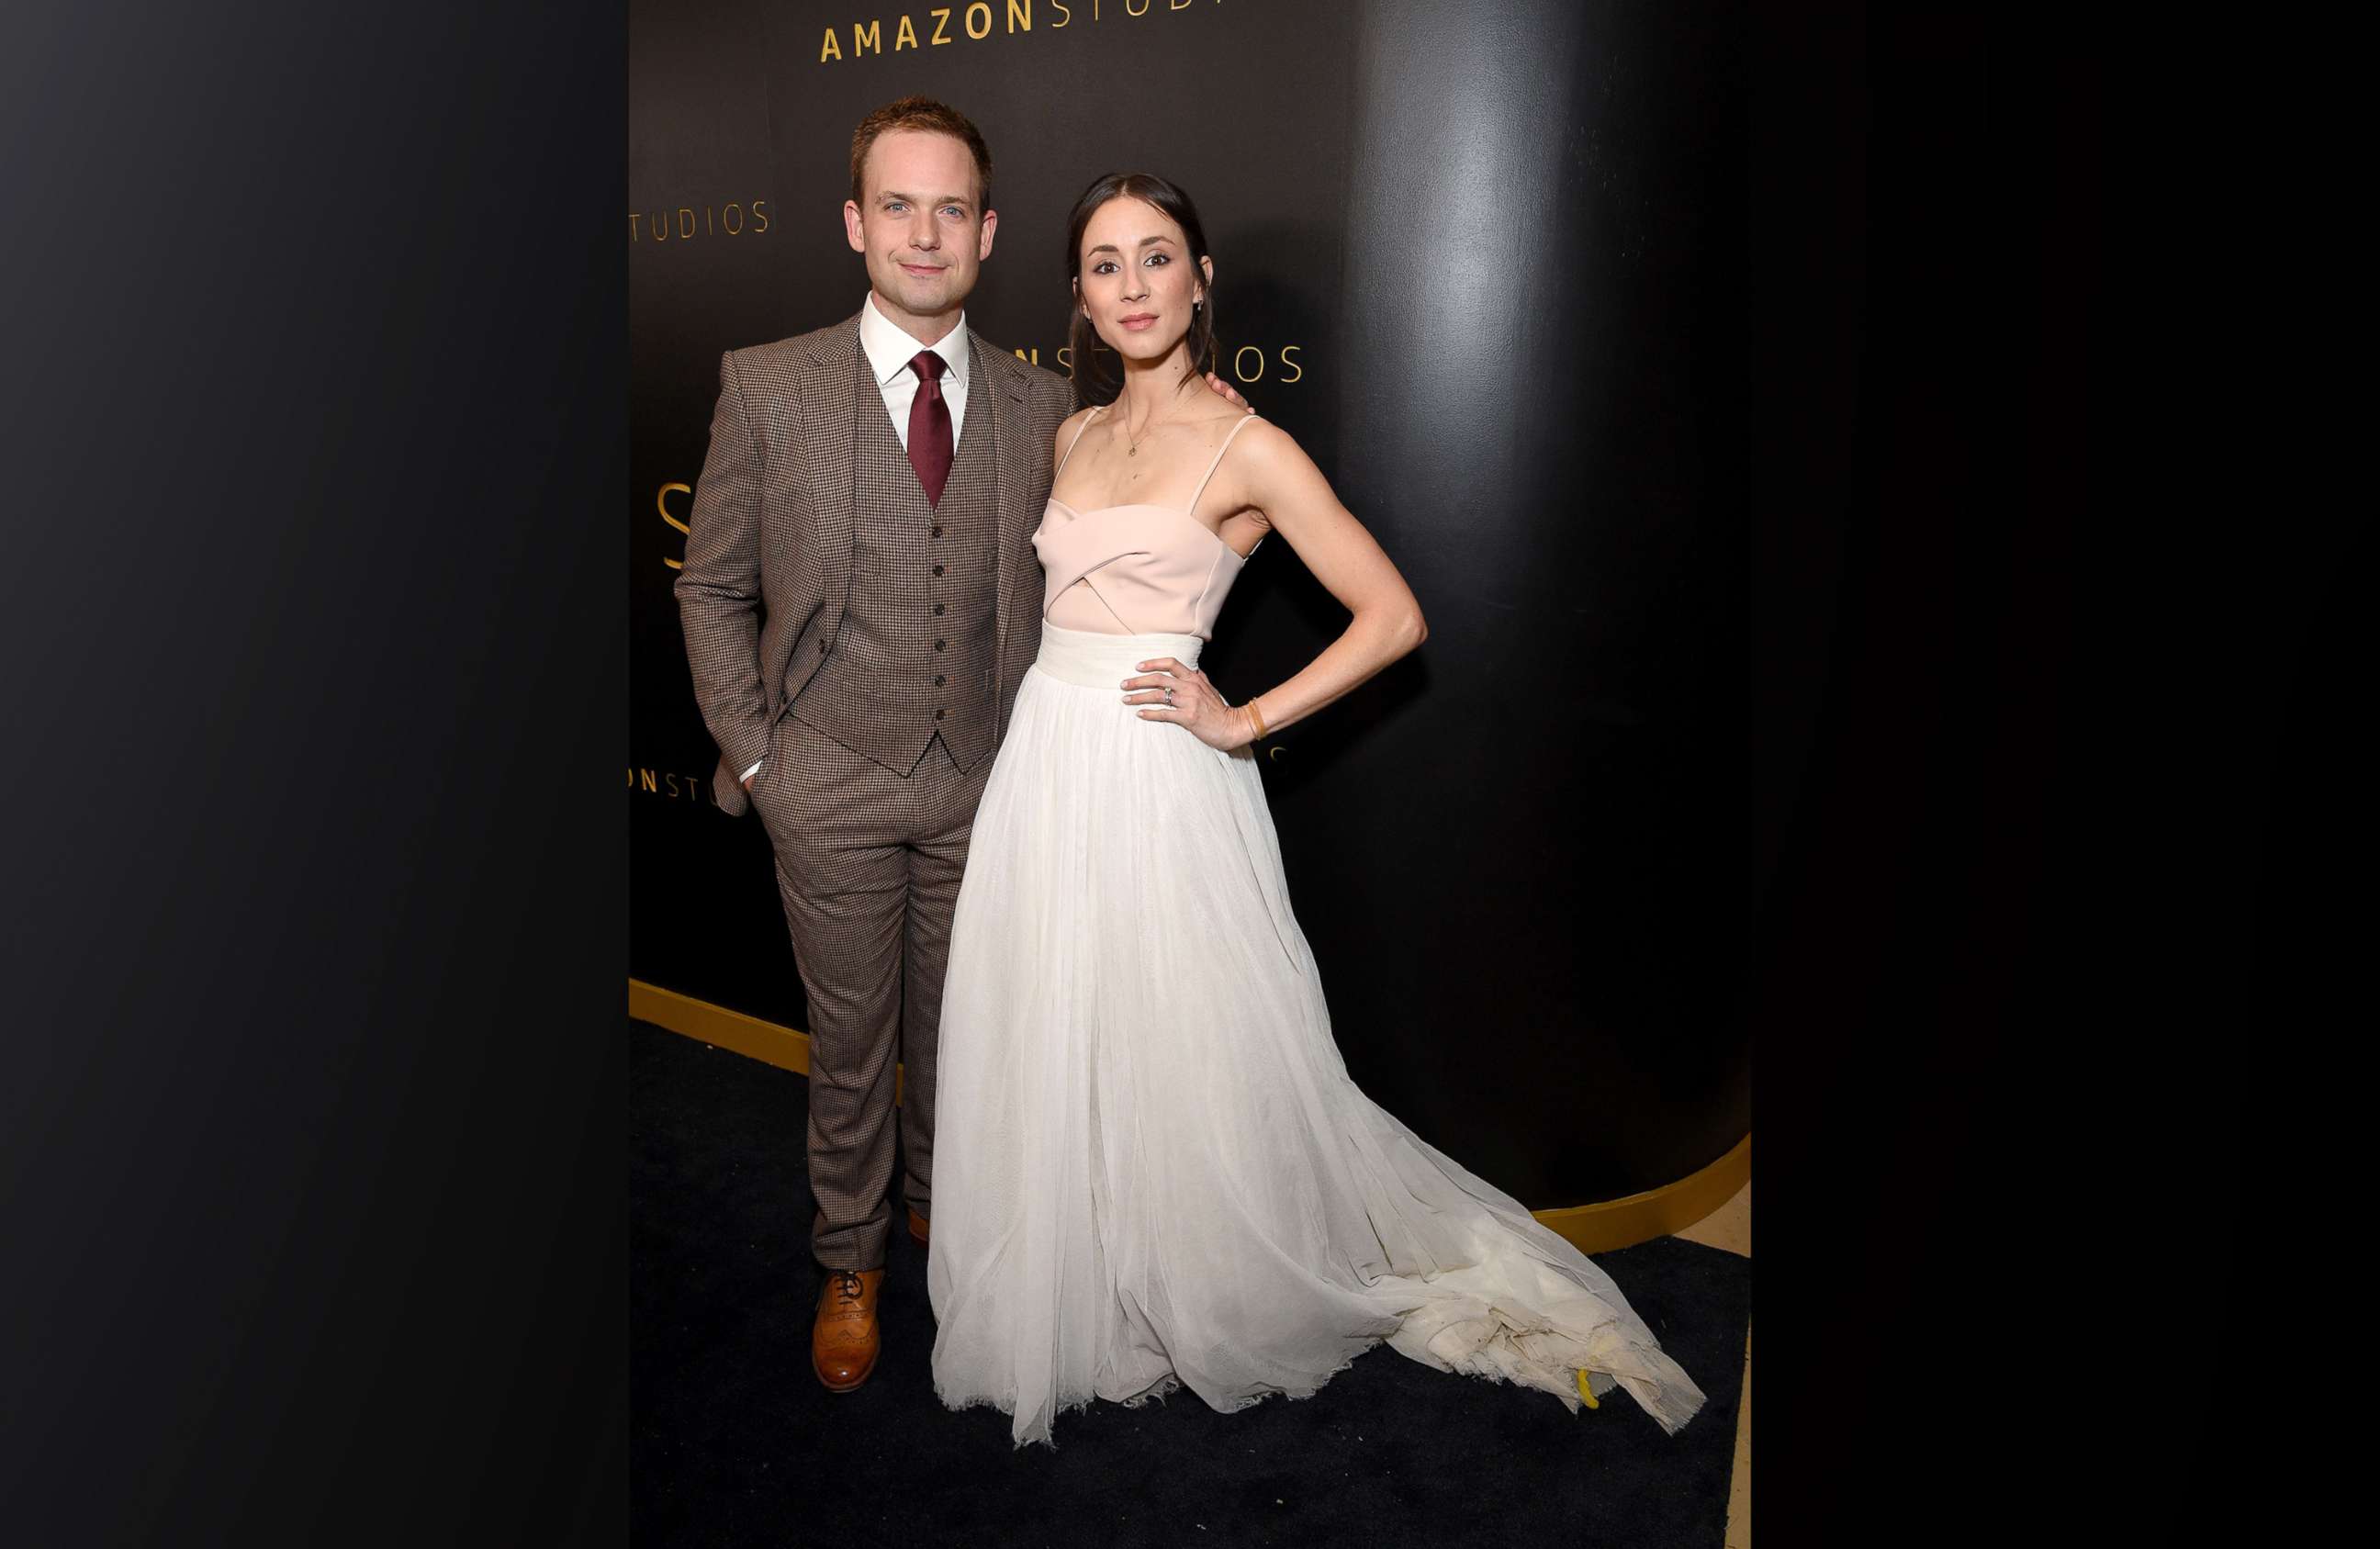 PHOTO: Patrick J. Adams and Troian Bellisario pose on the red carpet for a Golden Globes party in Los Angeles, Jan. 5, 2020.